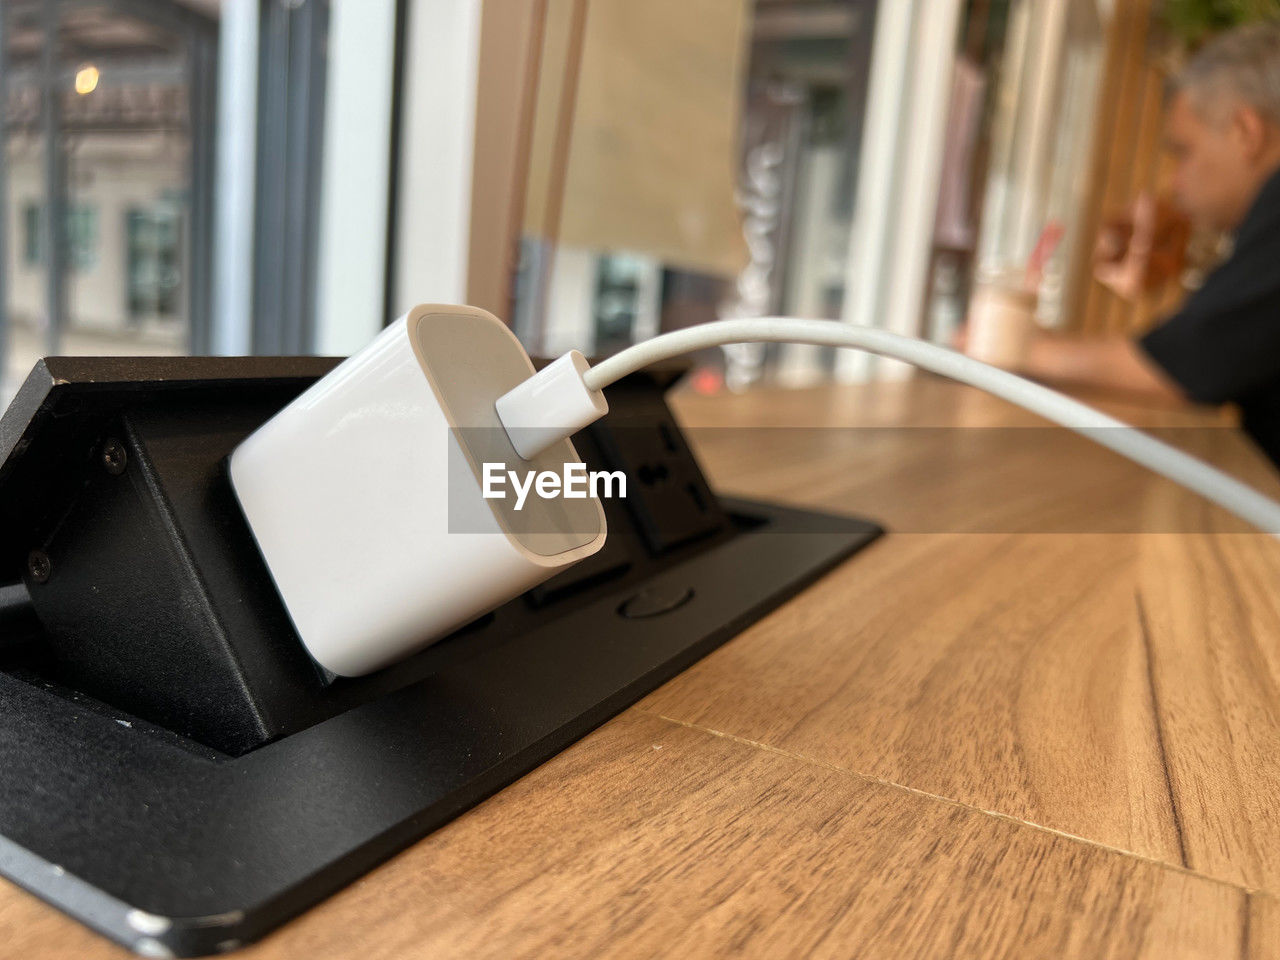 Charger is connected with the pop-up outlet on the table